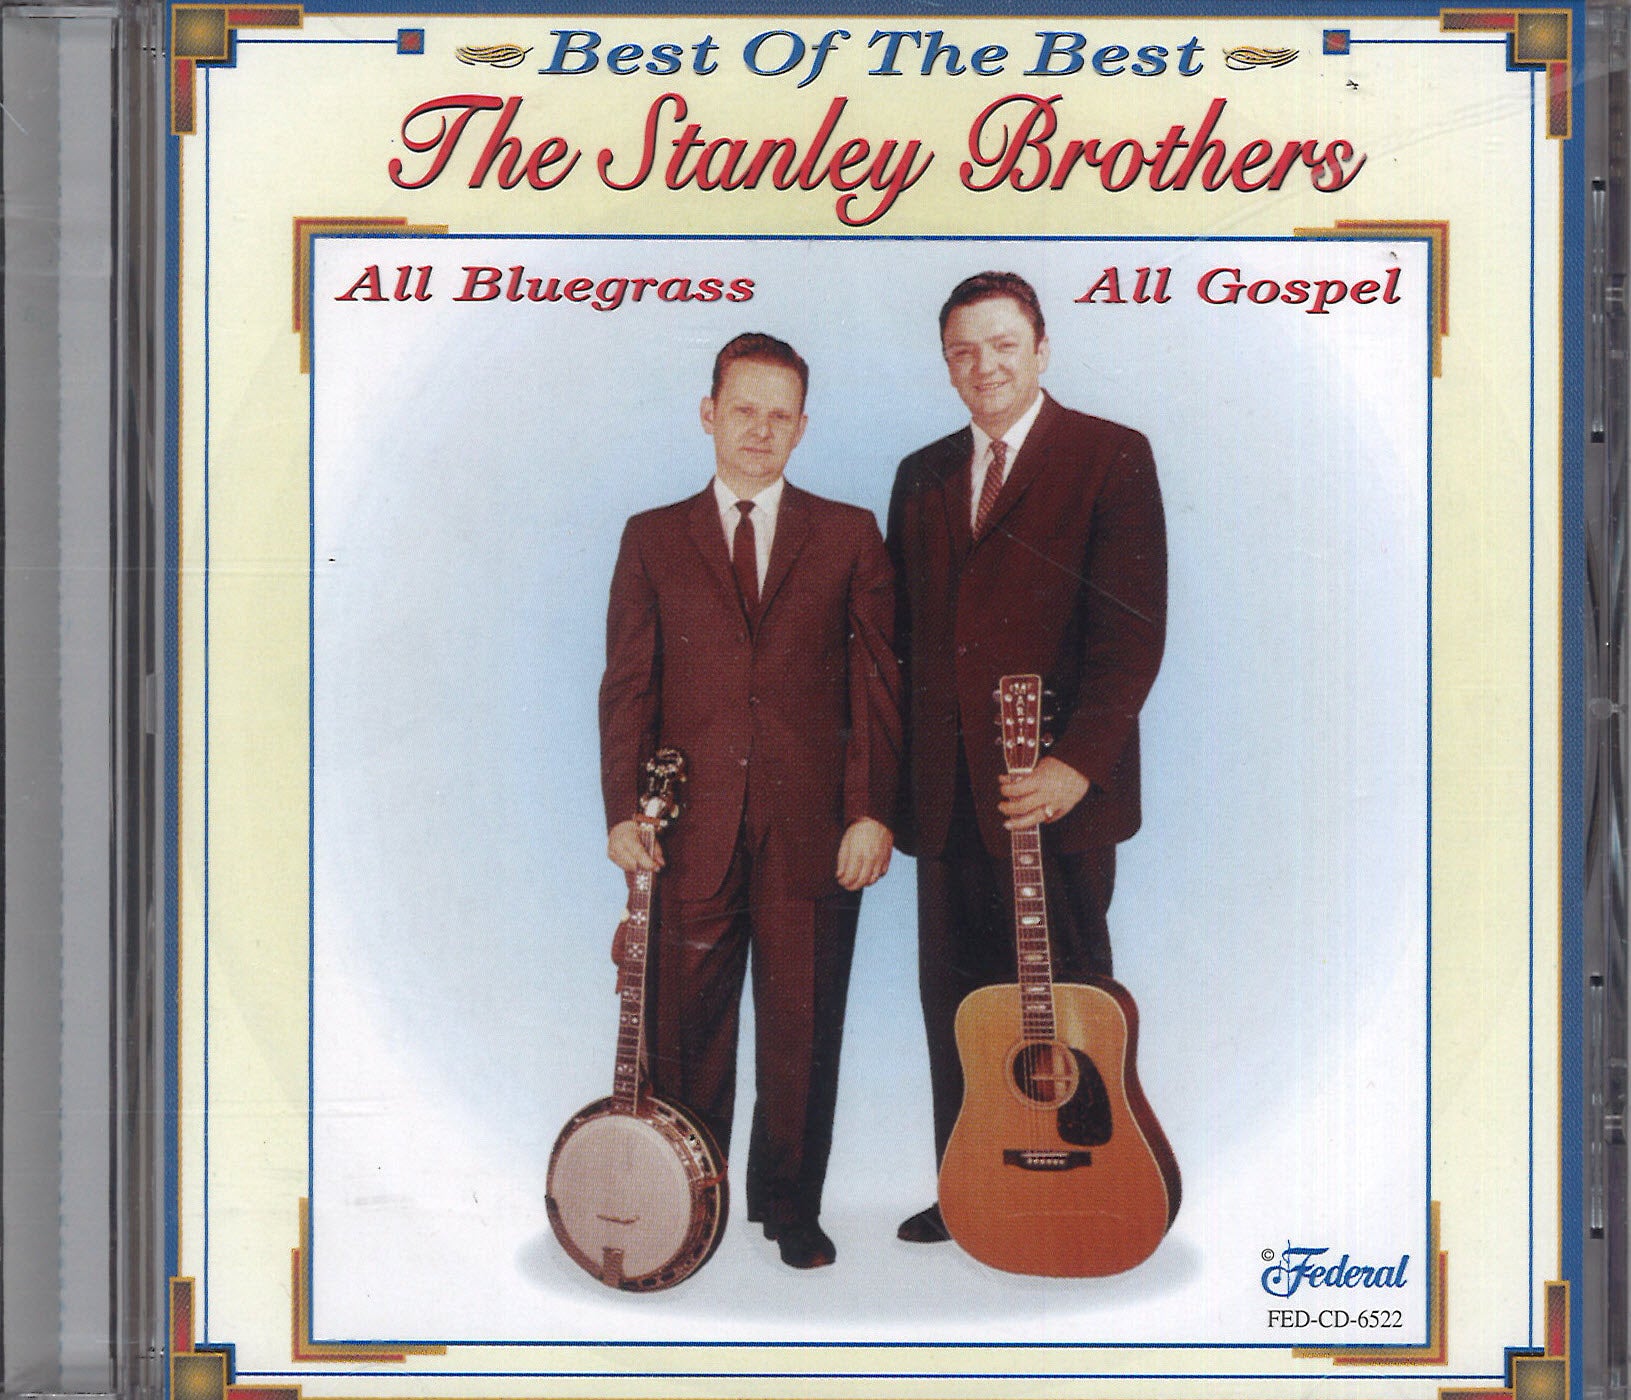 The Stanley Brothers All Bluegrass, All Gospel